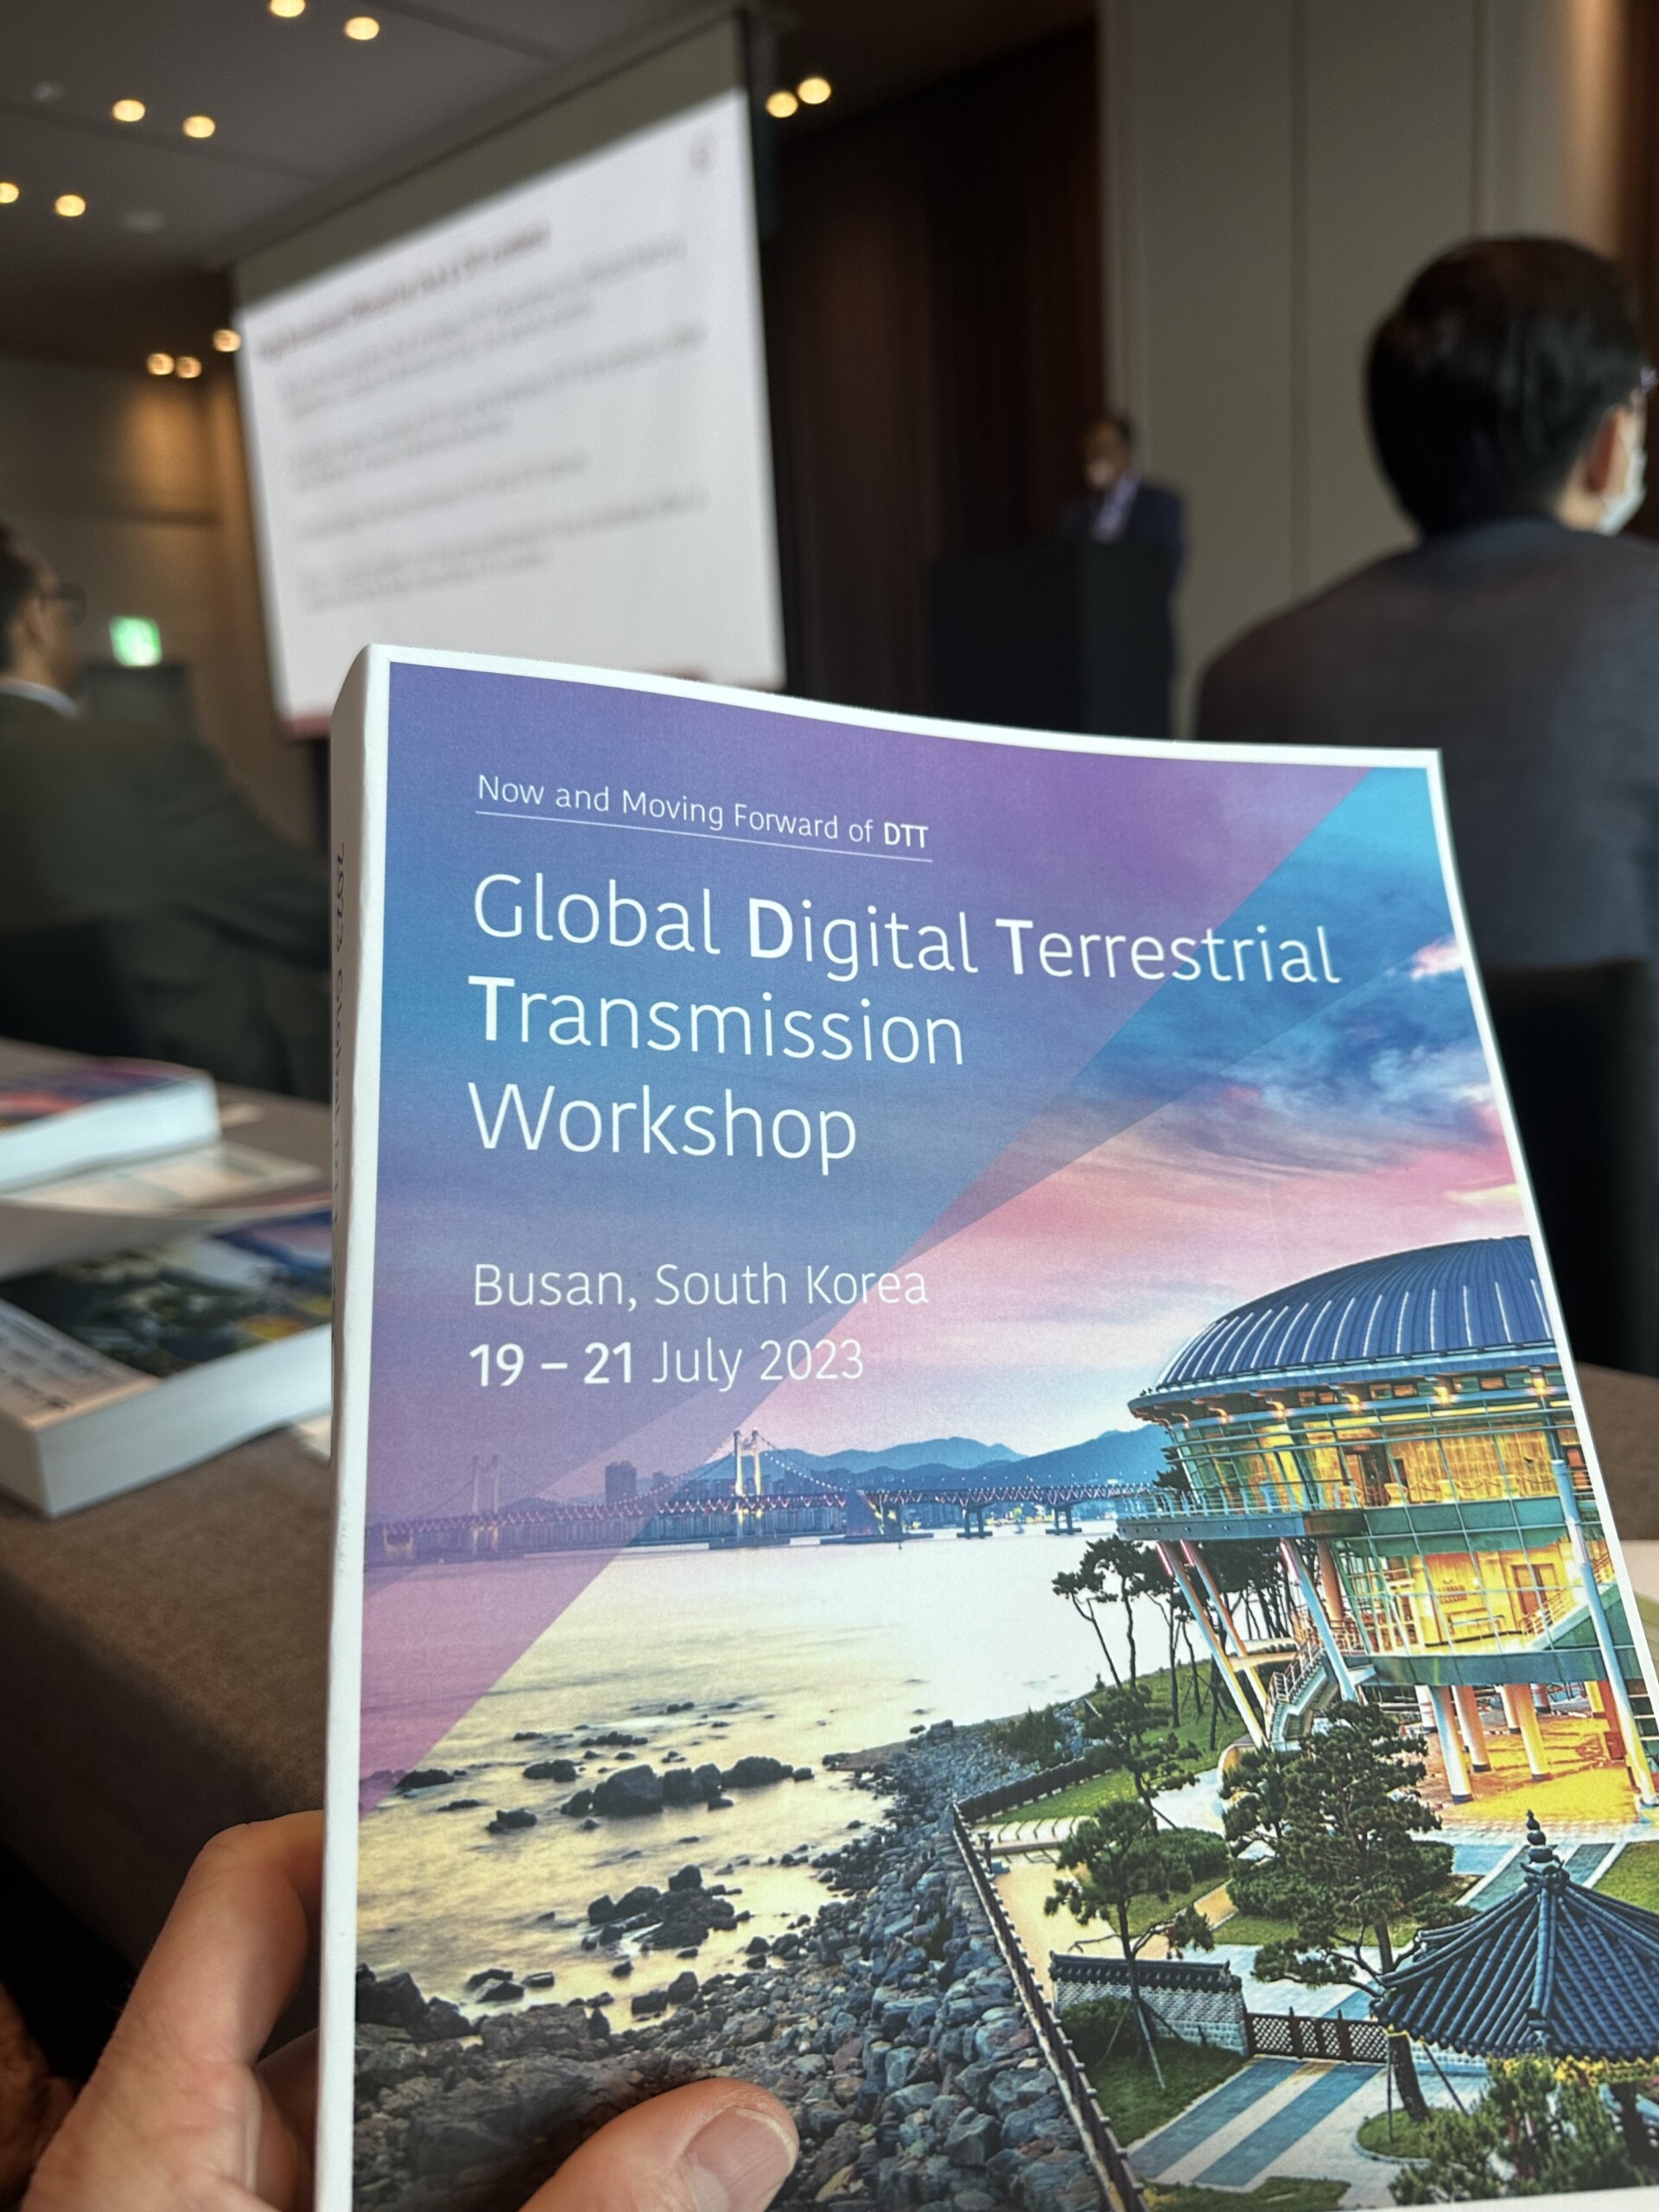 The Global DTT Workshop spanned two and a half days and featured speakers from around the world.